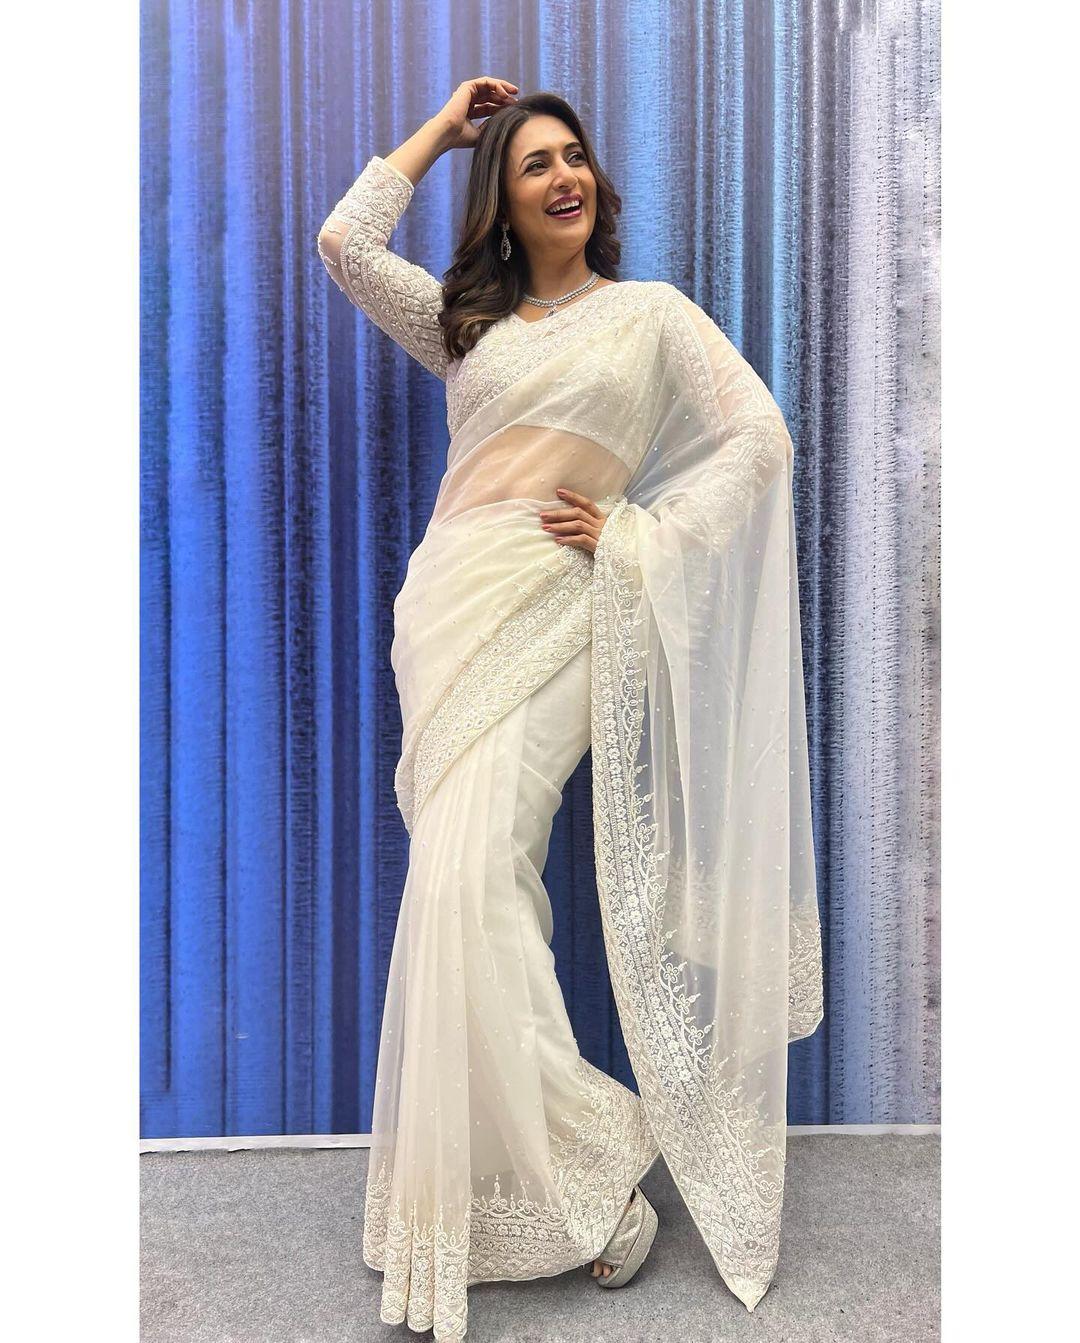 One can never go wrong with a saree, and Divyanka Tripathi proved it right as she wore a stunning sheer white saree and paired it with a matching blouse